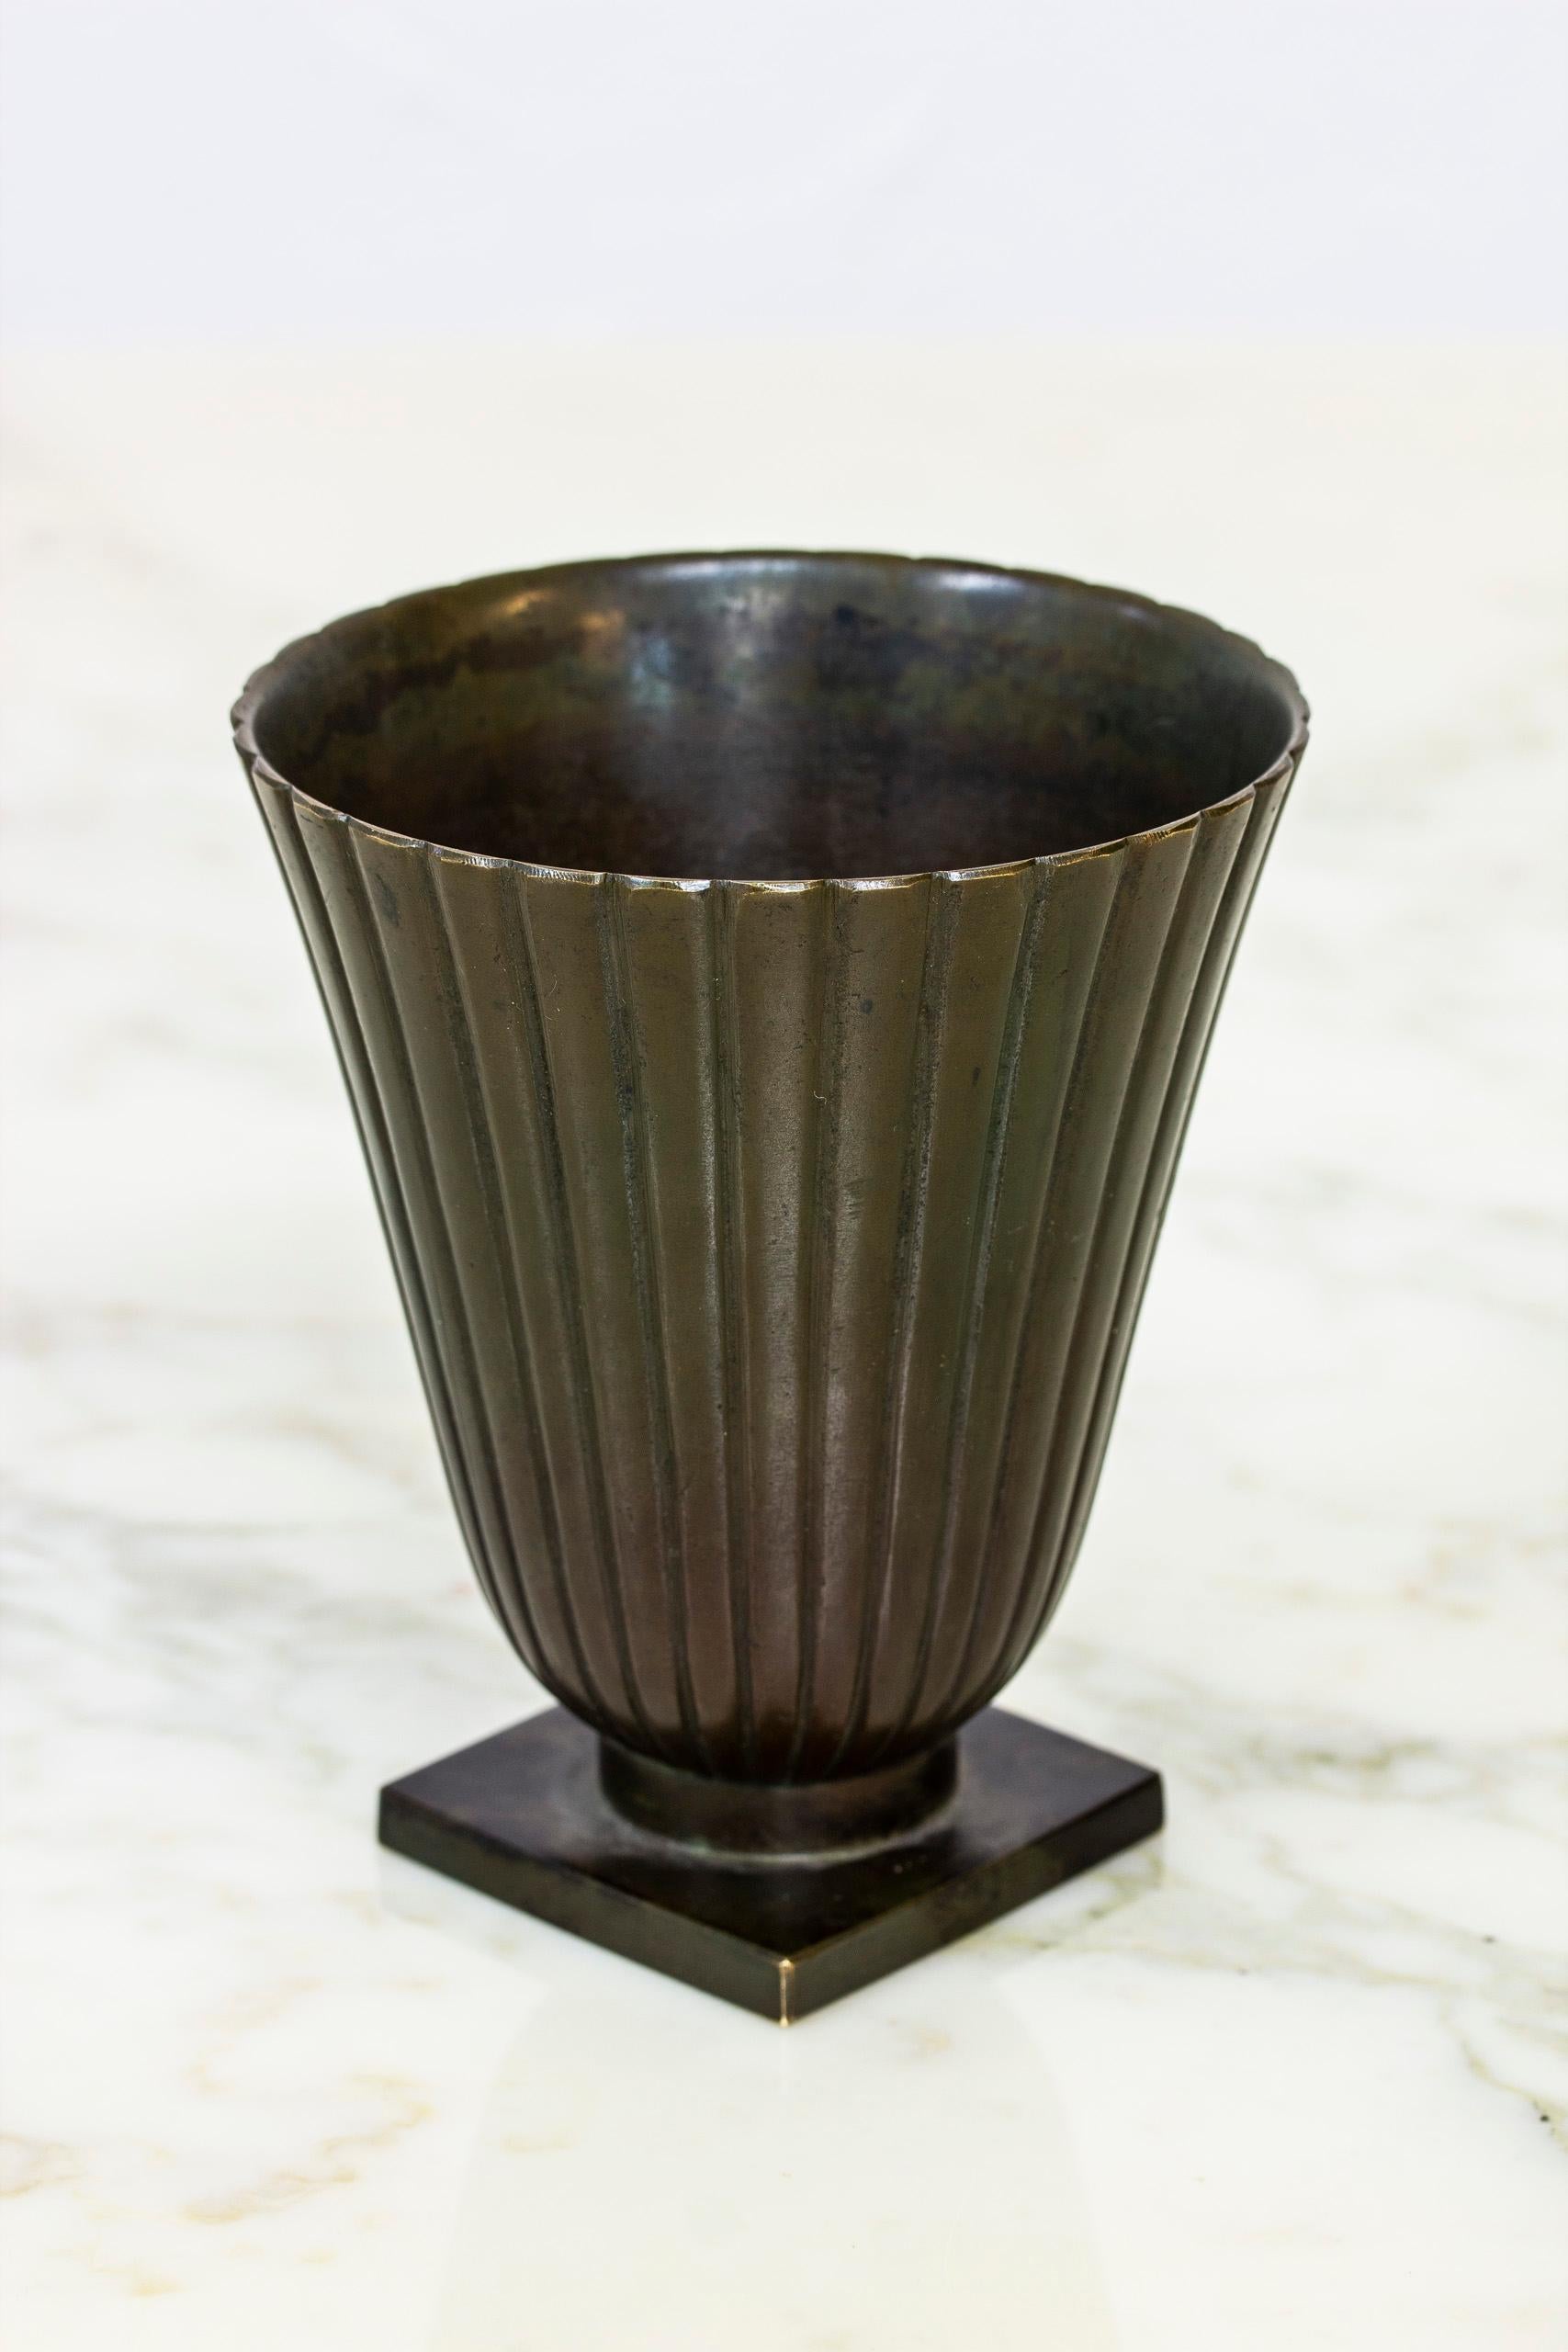 Vase produced by Guldsmedsaktiebolaget, GAB. Made during the 1930s in Stockholm, Sweden. Made from bronze with dark green patina. Signed underneath GAB and model number 69. Very good vintage condition with light age related patina.